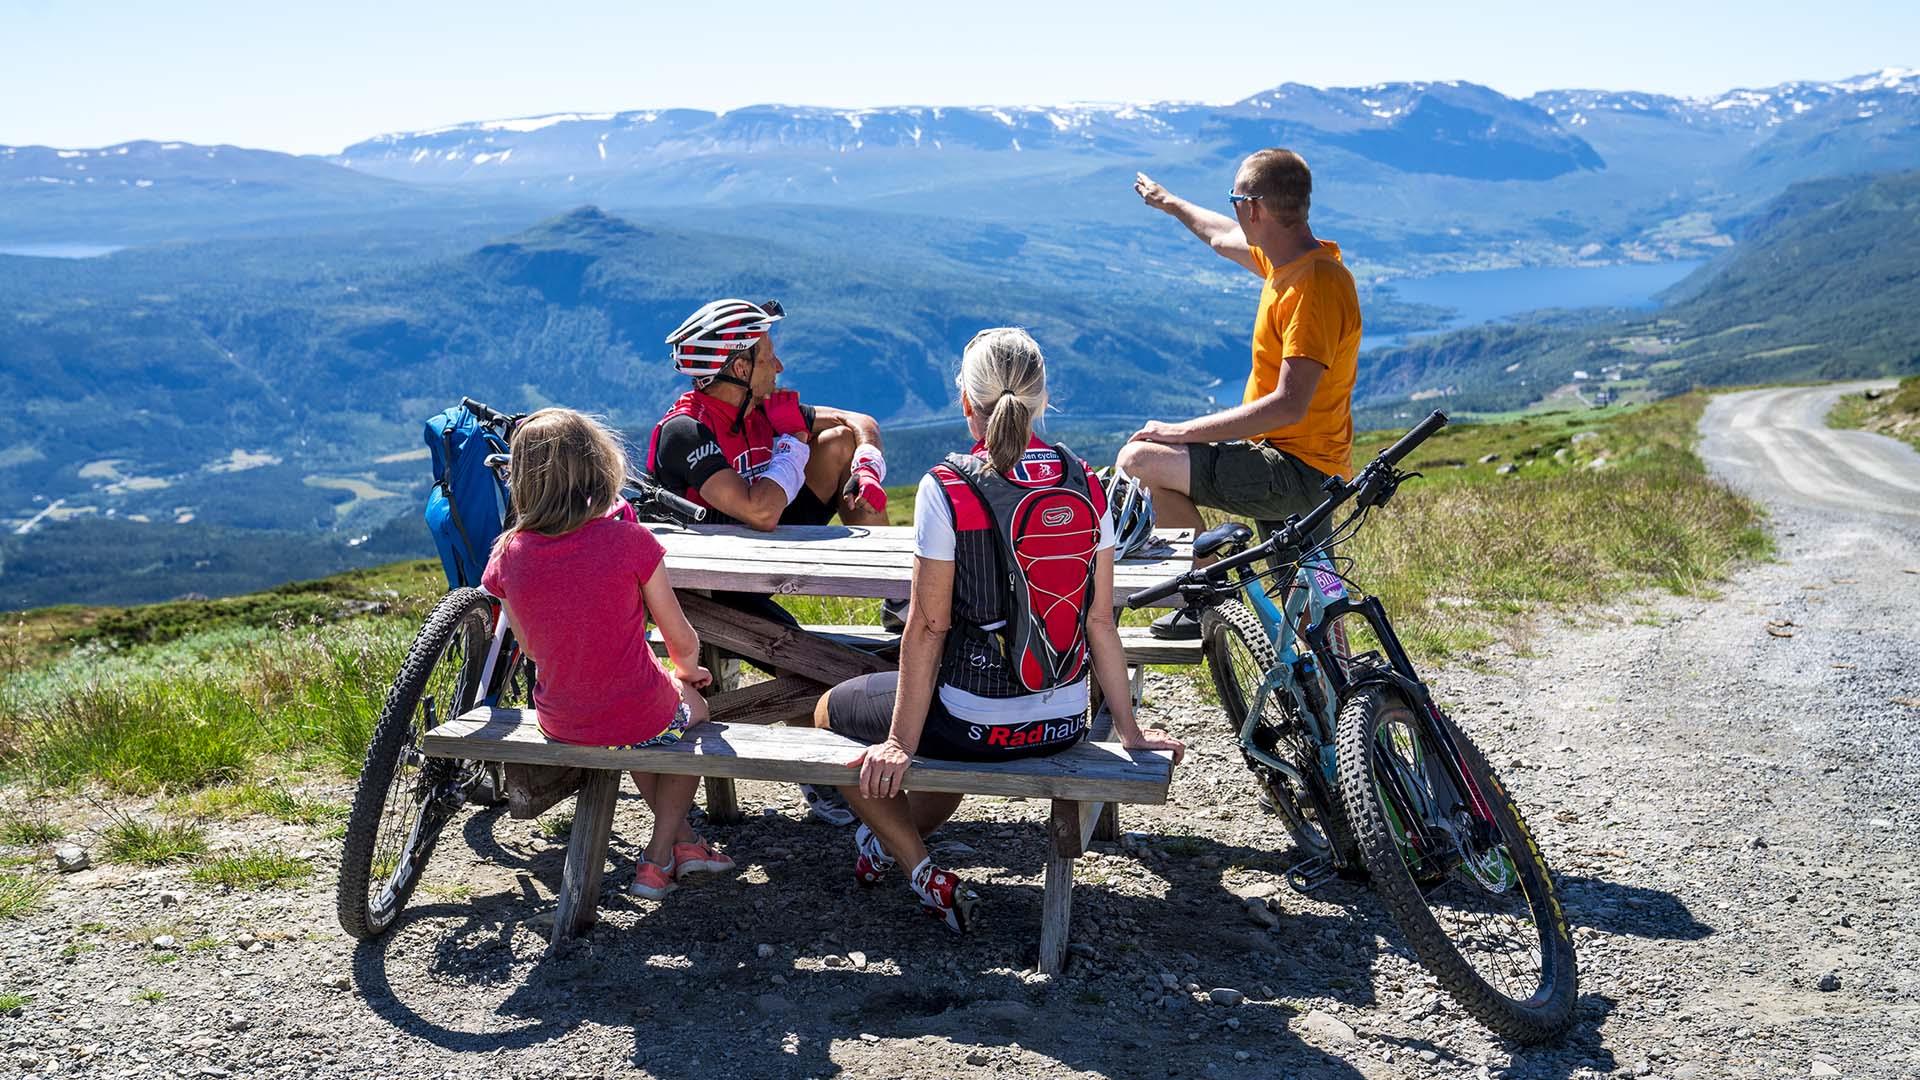 Cyclists on a resting table and benches alongside a gravel road over a mountain pass with formidable view over the valley and towards distant mountains on a fine and warm summer's day.